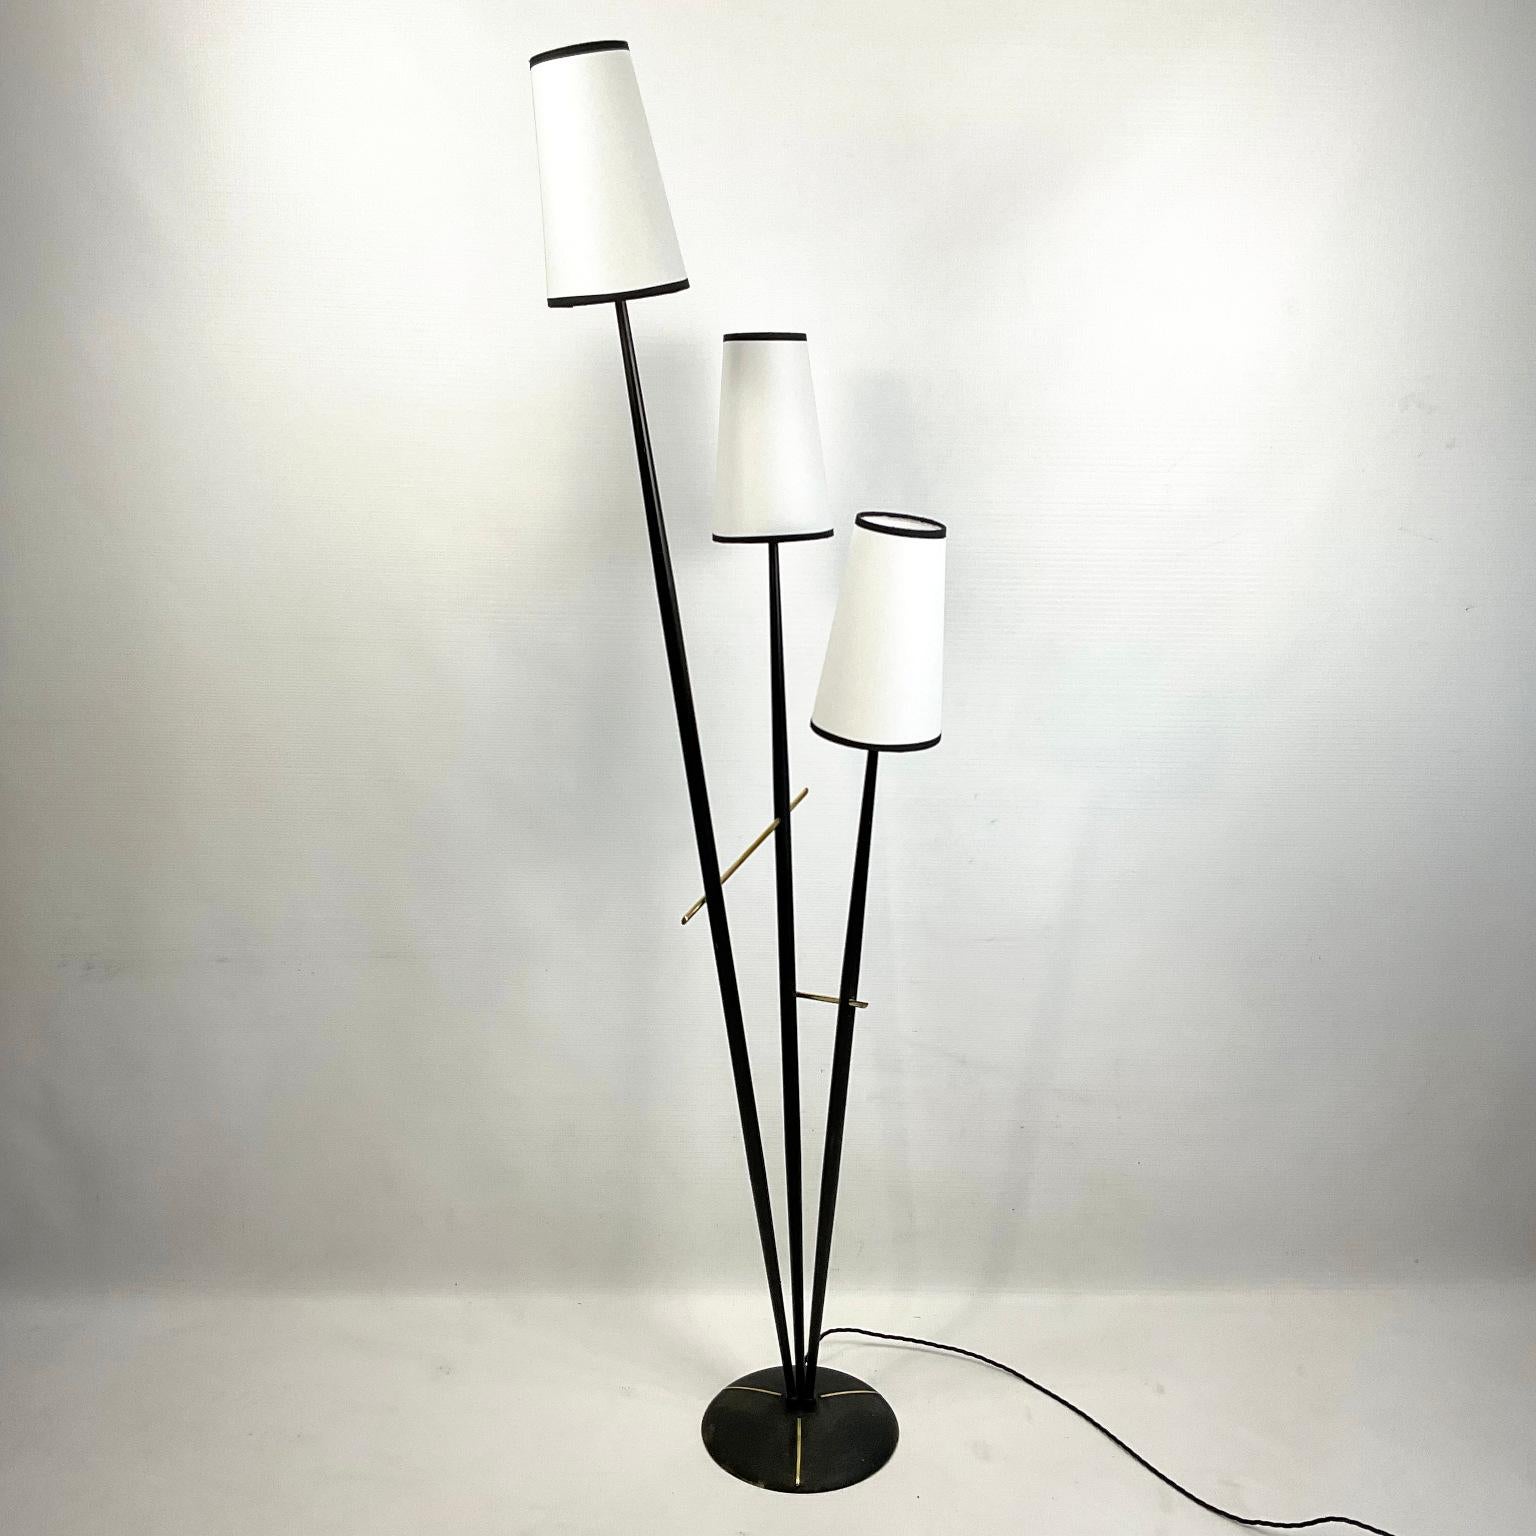 French Floor Lamp from the 1950s.
The circular base and the three branches are painted black with two polished brass crosspieces.
Each of the arms is topped with a parchment shade with a black trim ribbon.
At the base of each lampshade, there is a